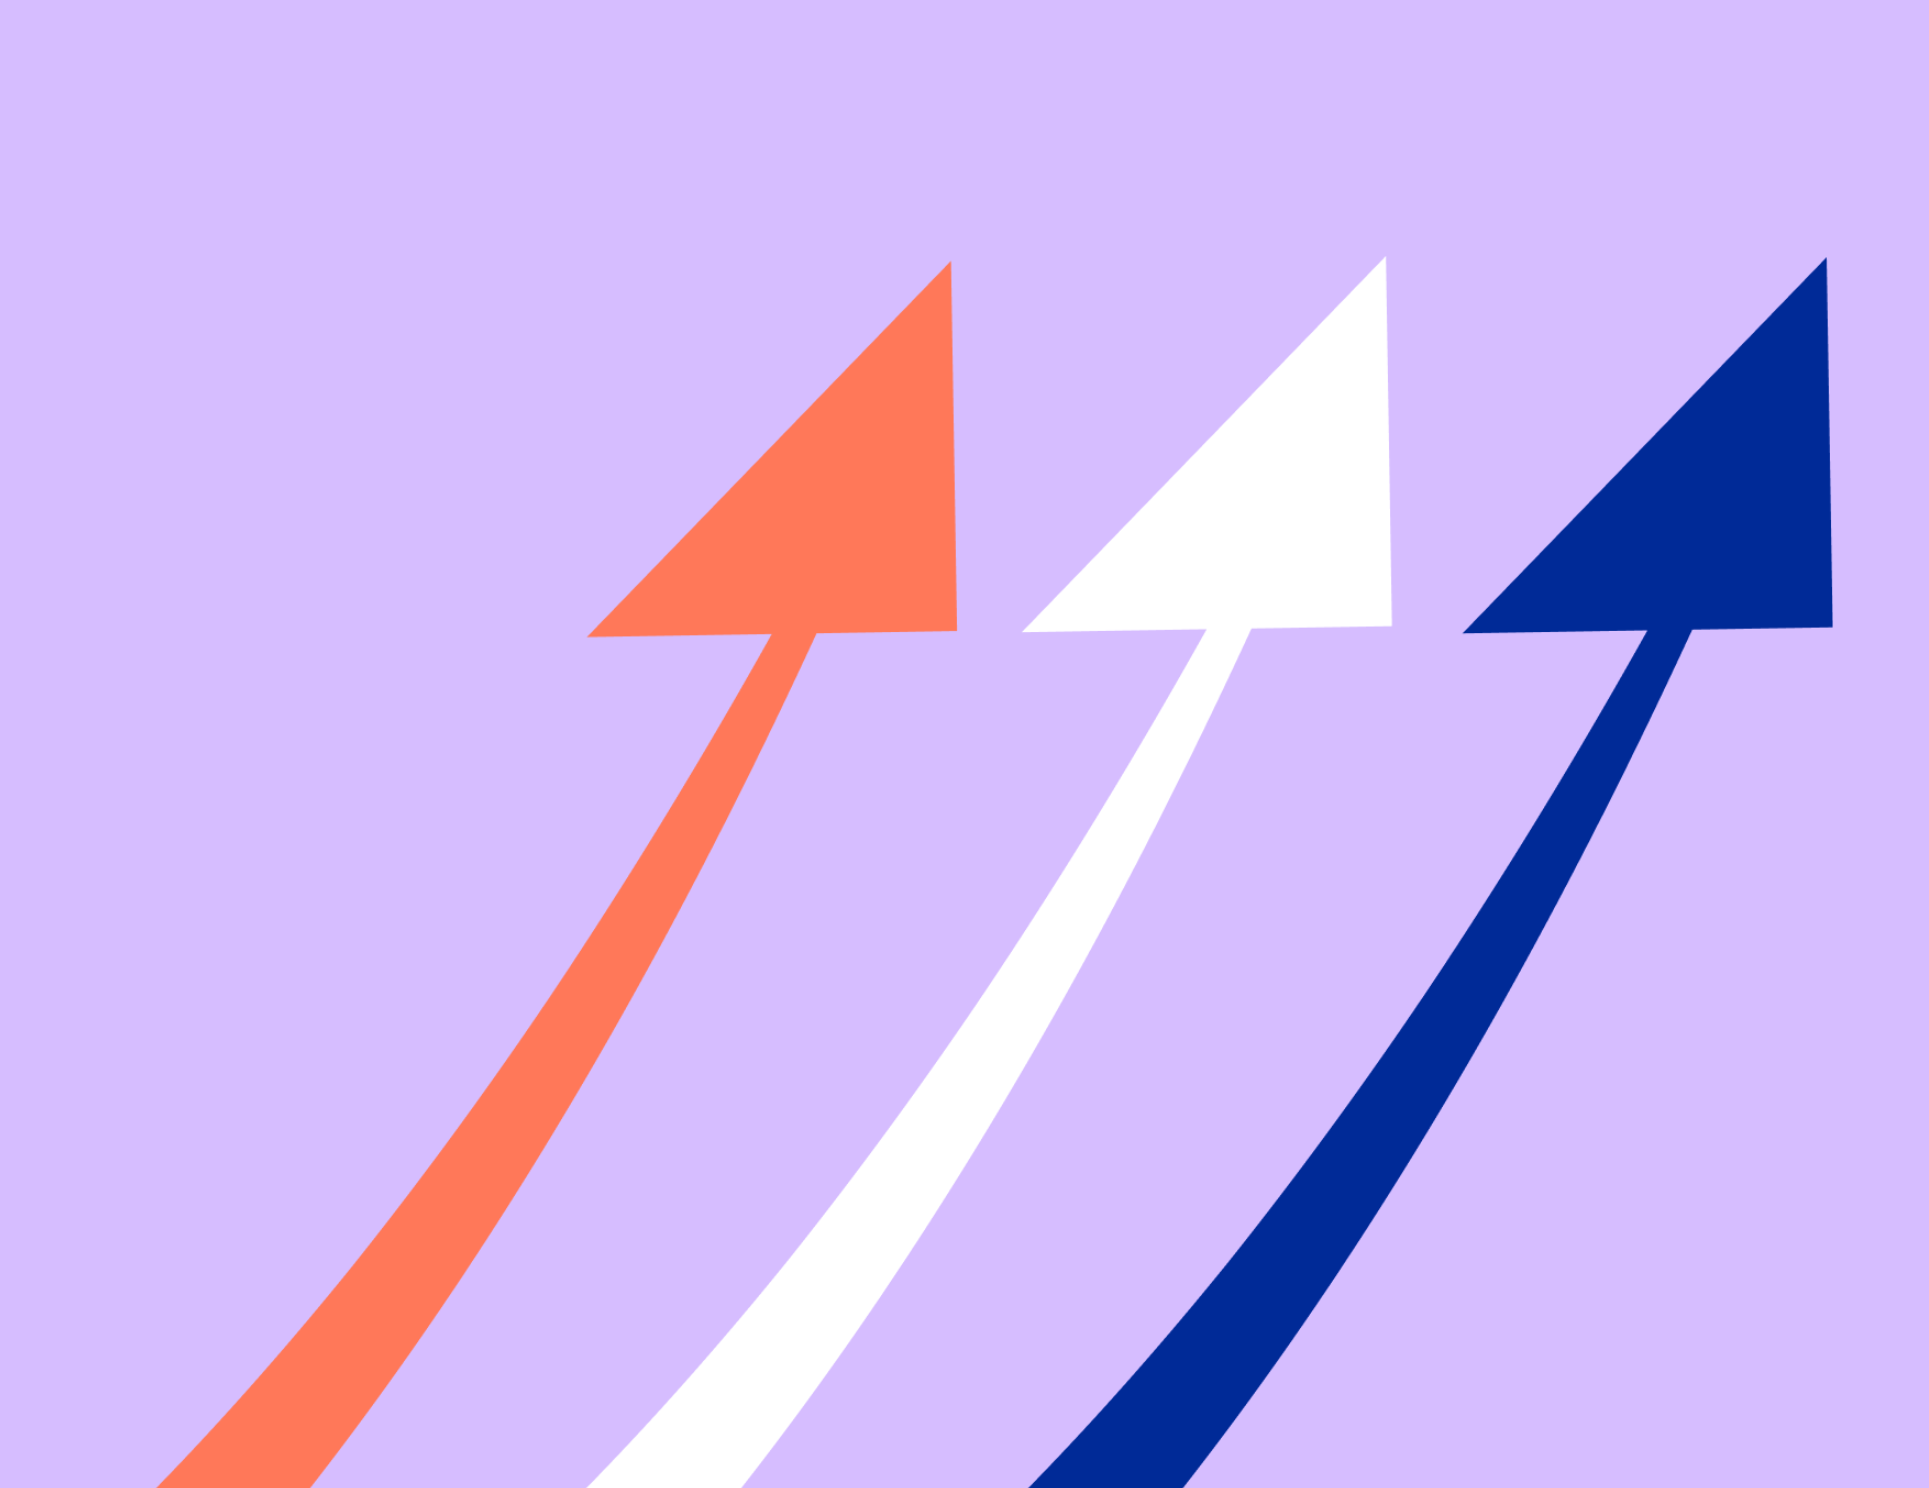 image of orange, white and blue arrows on a purple background